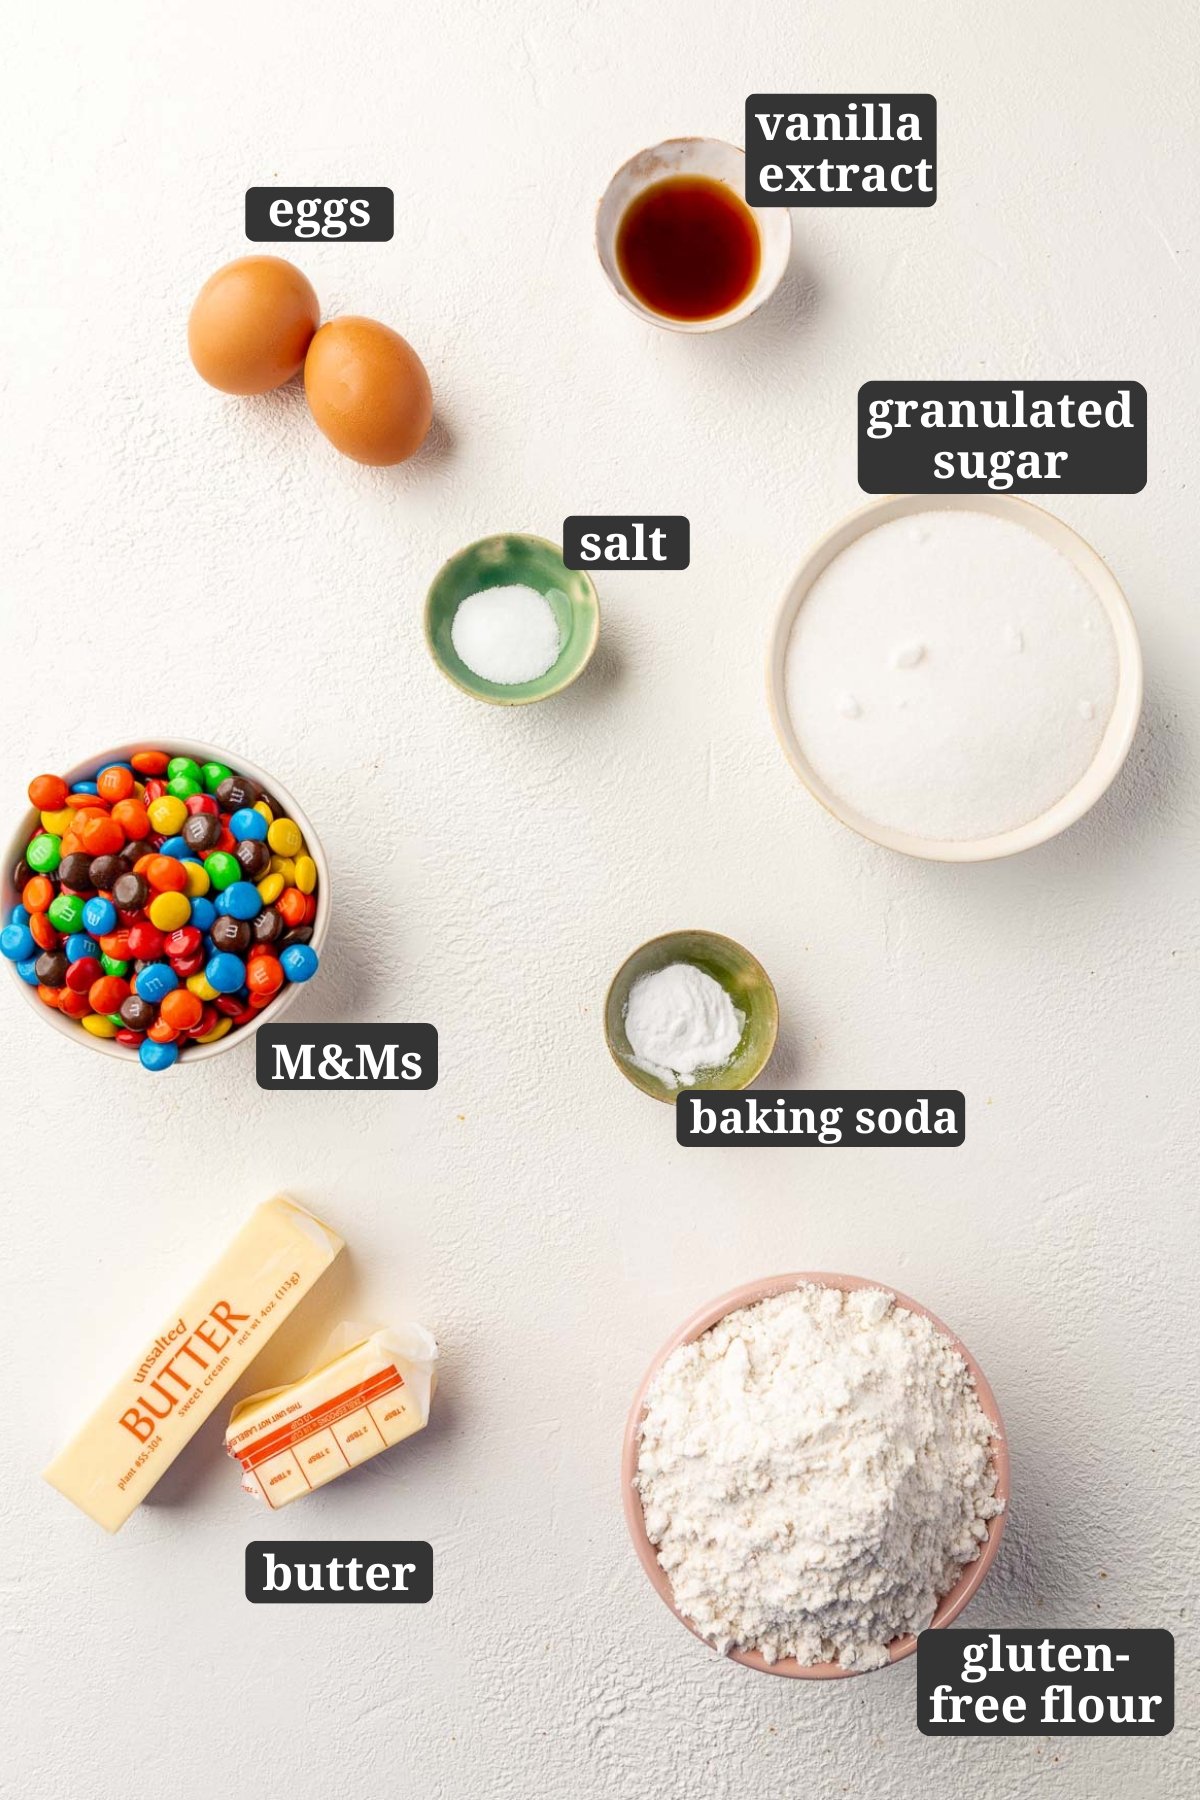 Ingredients in small bowls to make gluten-free M&M sugar cookies, including two eggs, vanilla extract, salt, granulated sugar, M&Ms, baking soda, butter and gluten-free flour with text overlays over each ingredient.